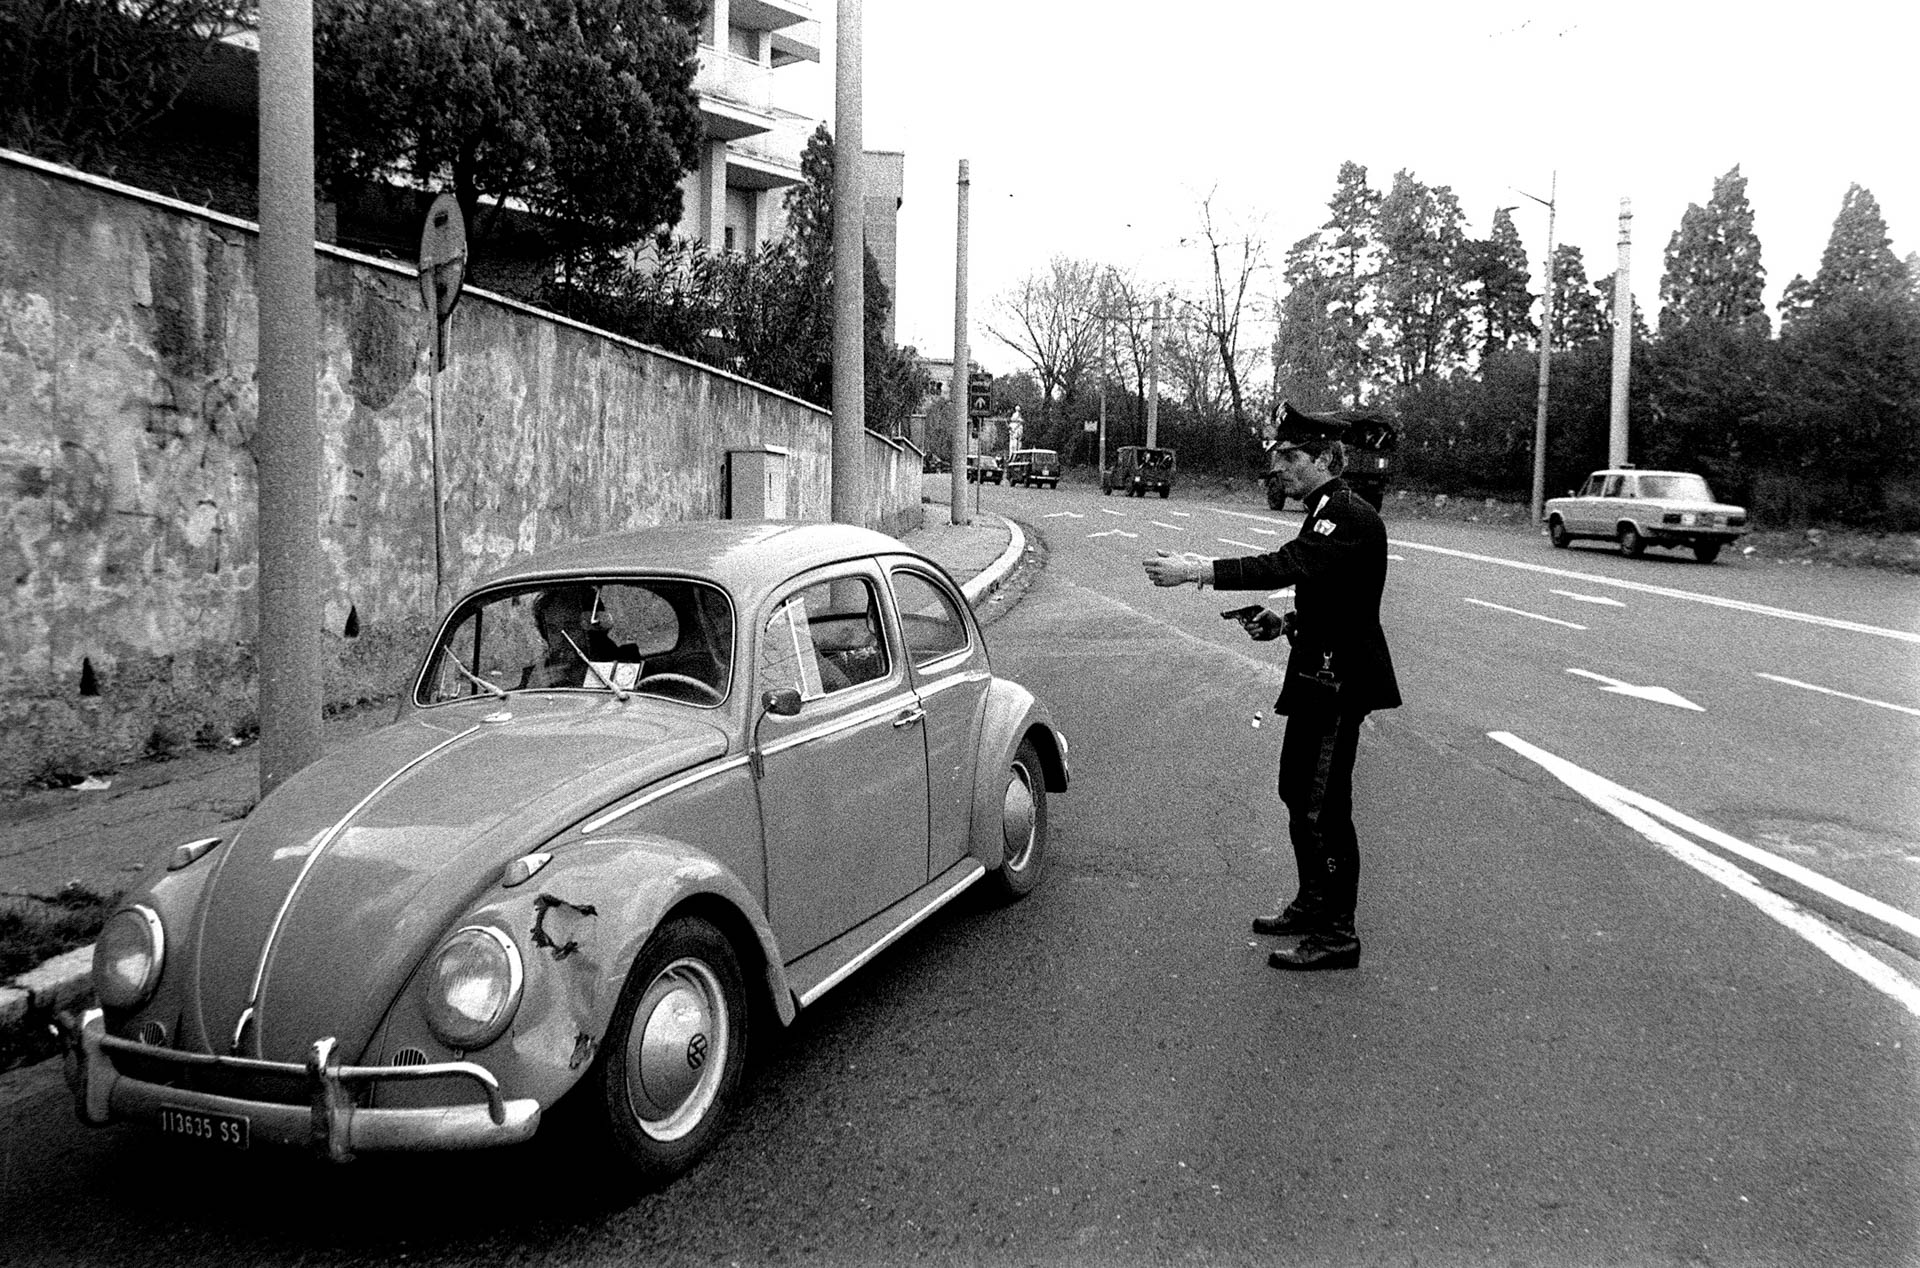  Rome, Italy - 5 May 1978 Controls in the streets of Rome by Italian police after Aldo Moro's kidnapping.&nbsp;    